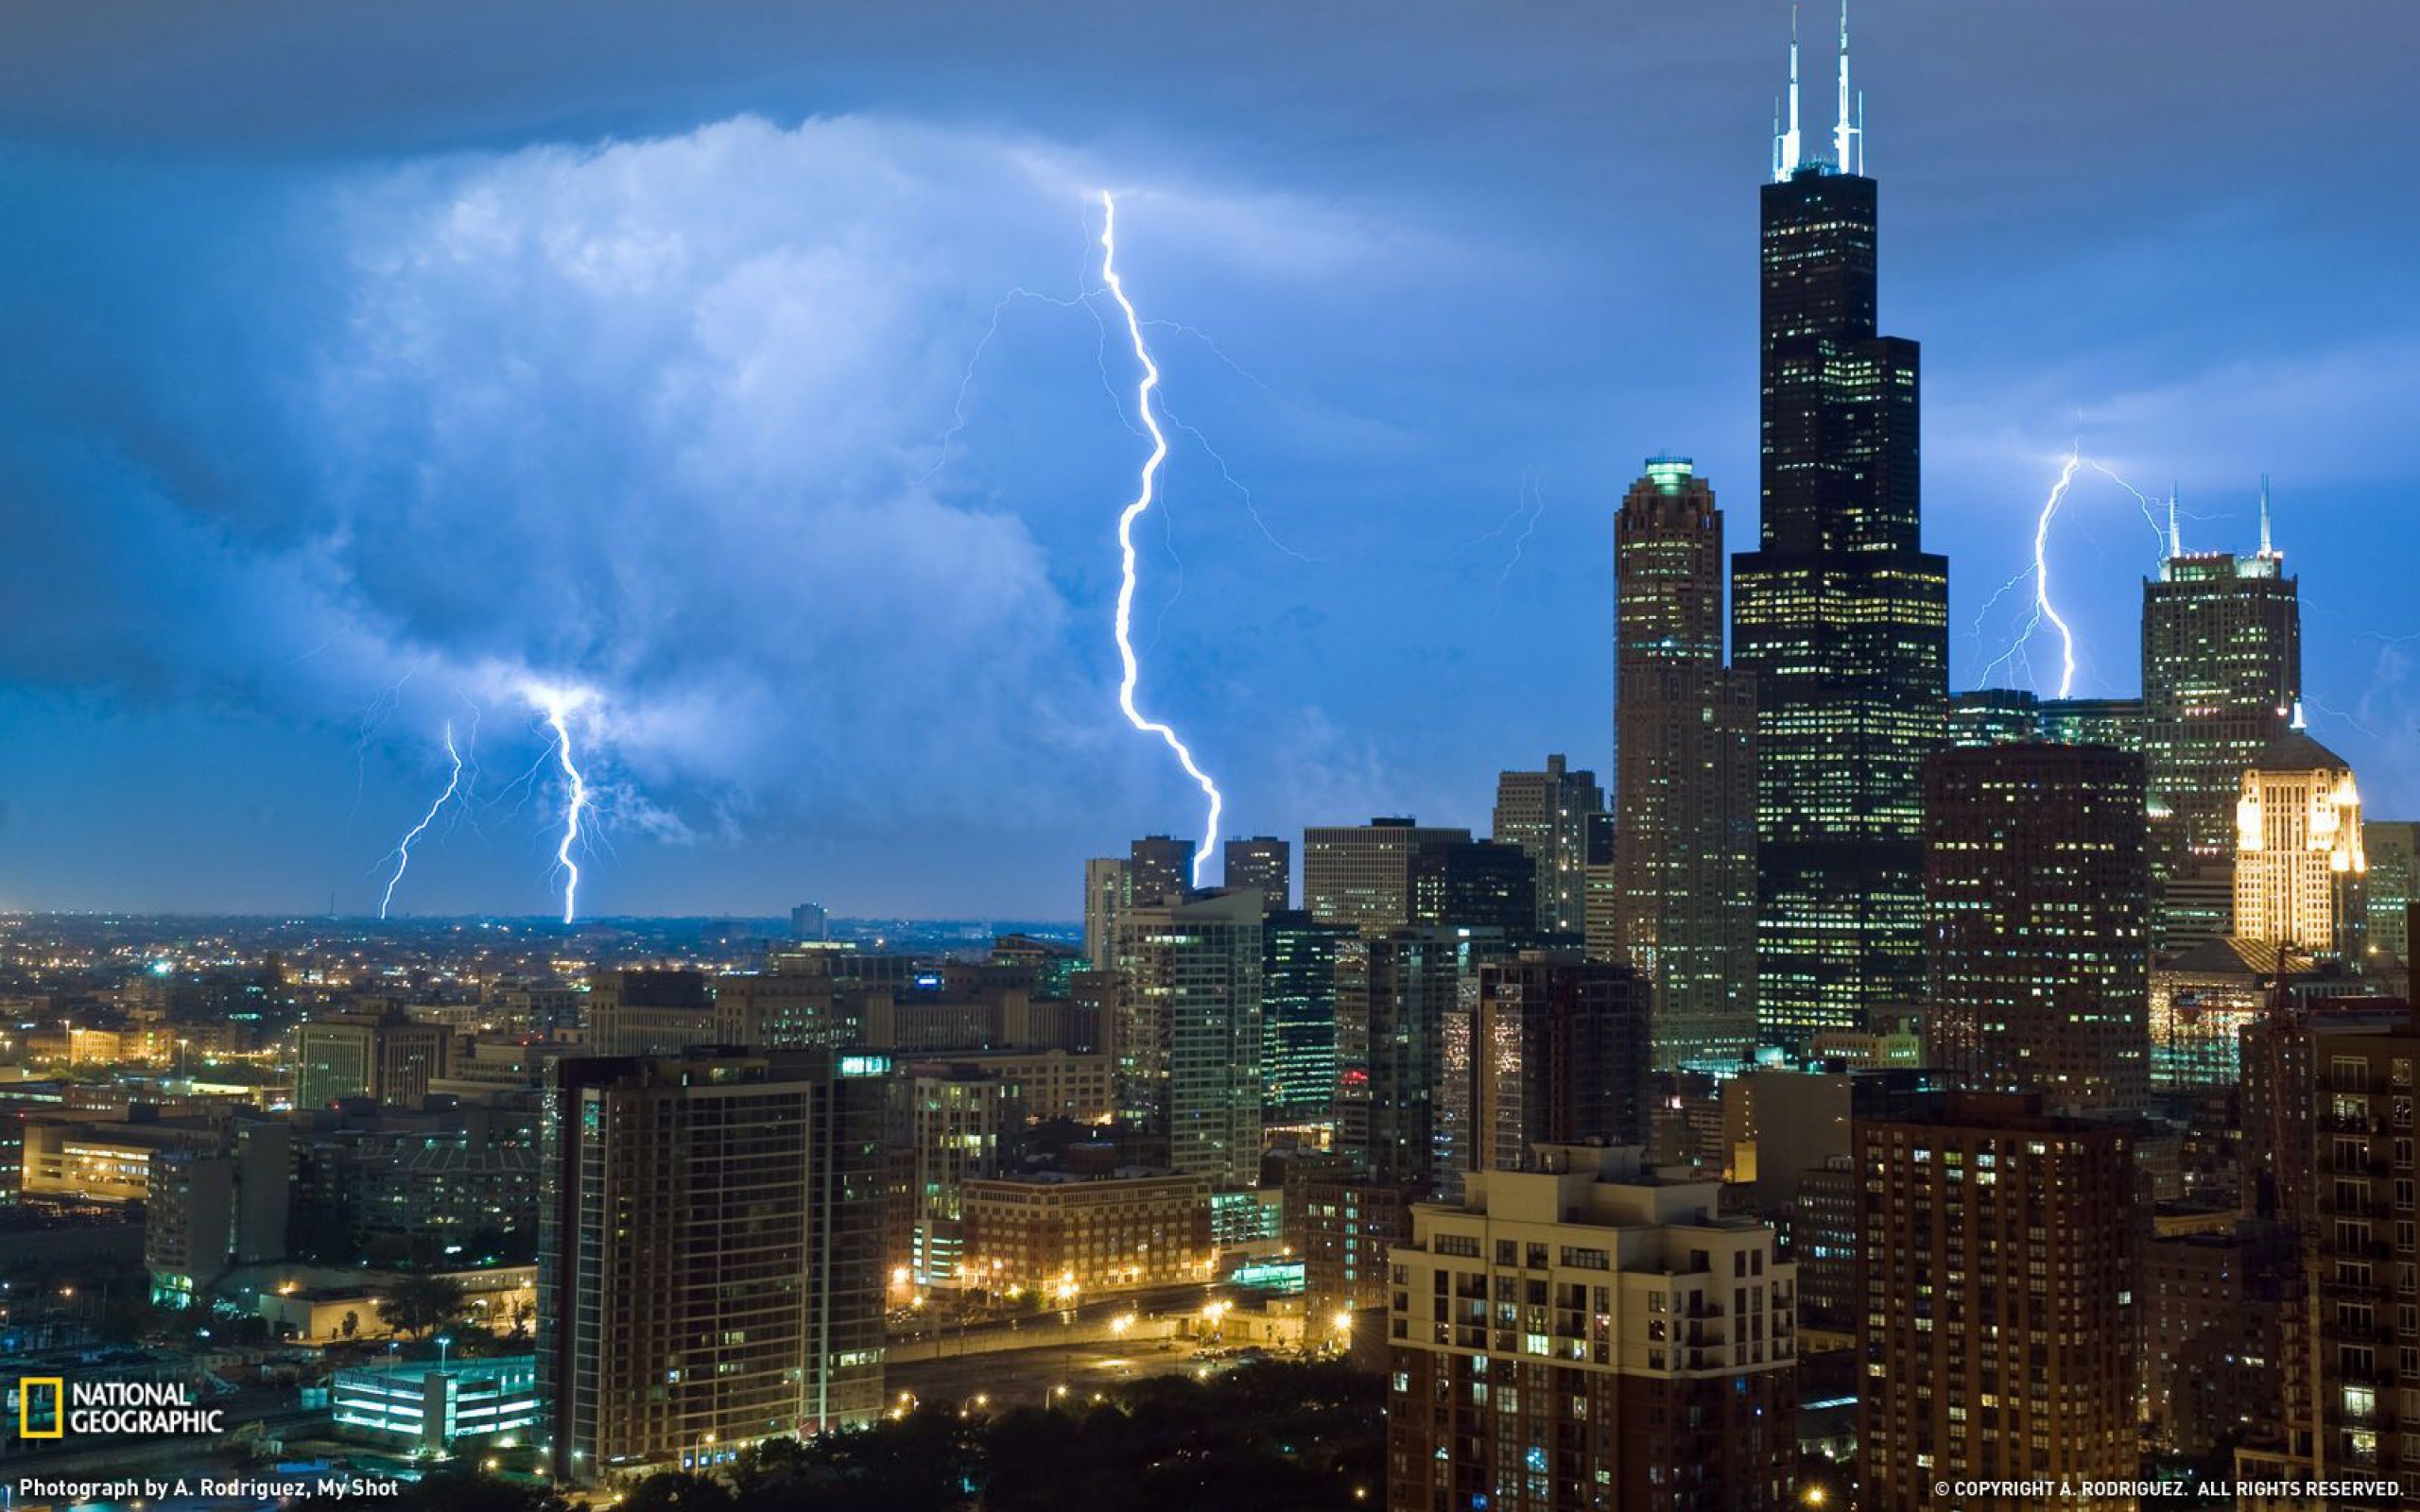 usa, Chicago, Illinois, City, Skyscrapers, Lightning, Photo, National, Geographic, Storm Wallpaper